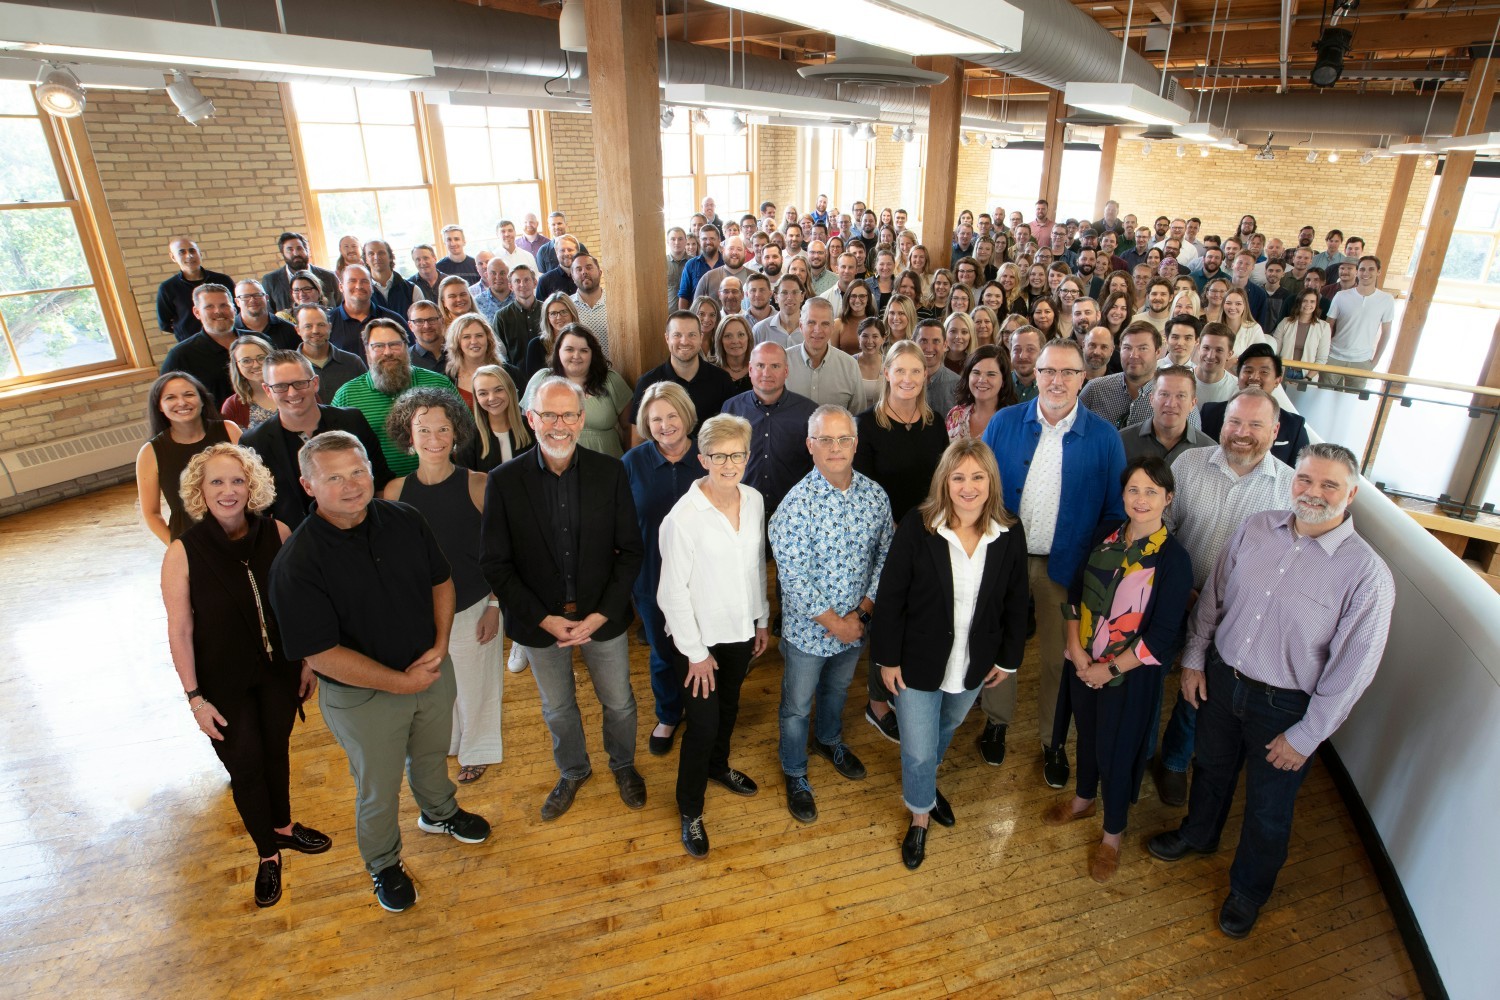 In 2014, JLG became one of the first great plains architecture practices to establish 100% employee ownership.